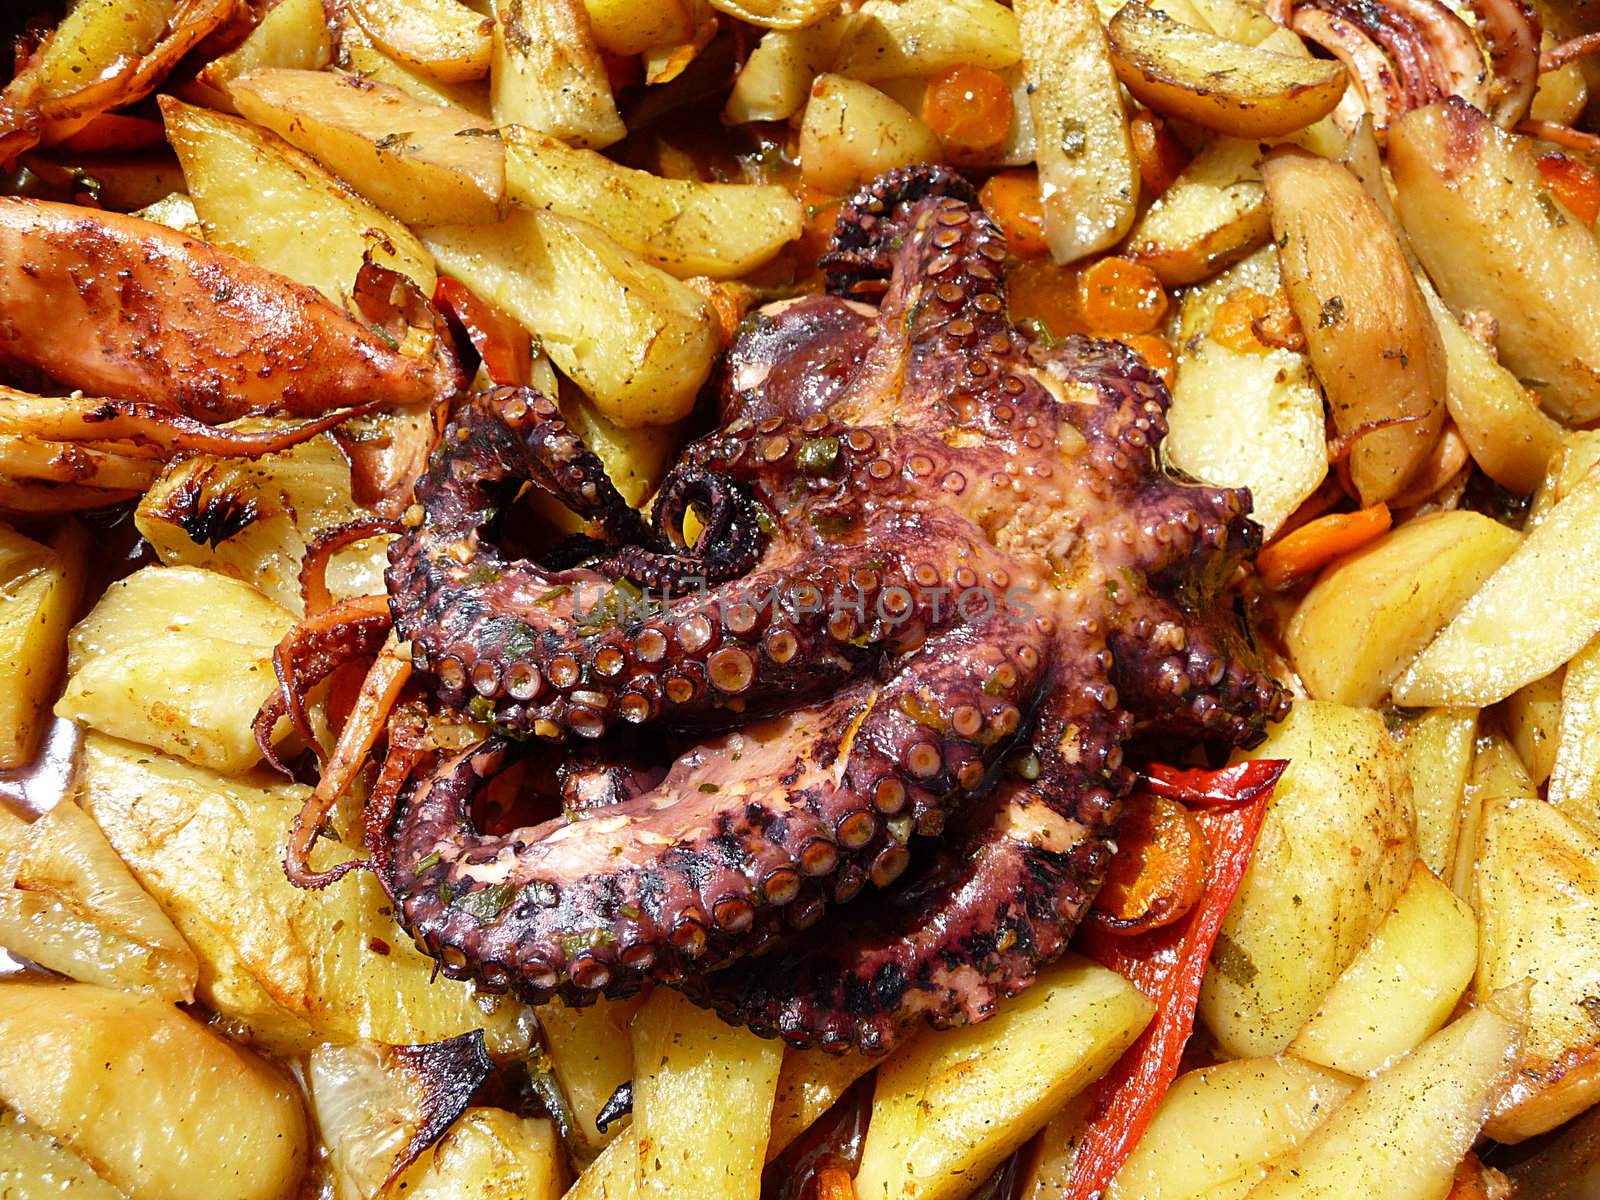 Octopussy with potato baked in olive oil by xbrchx